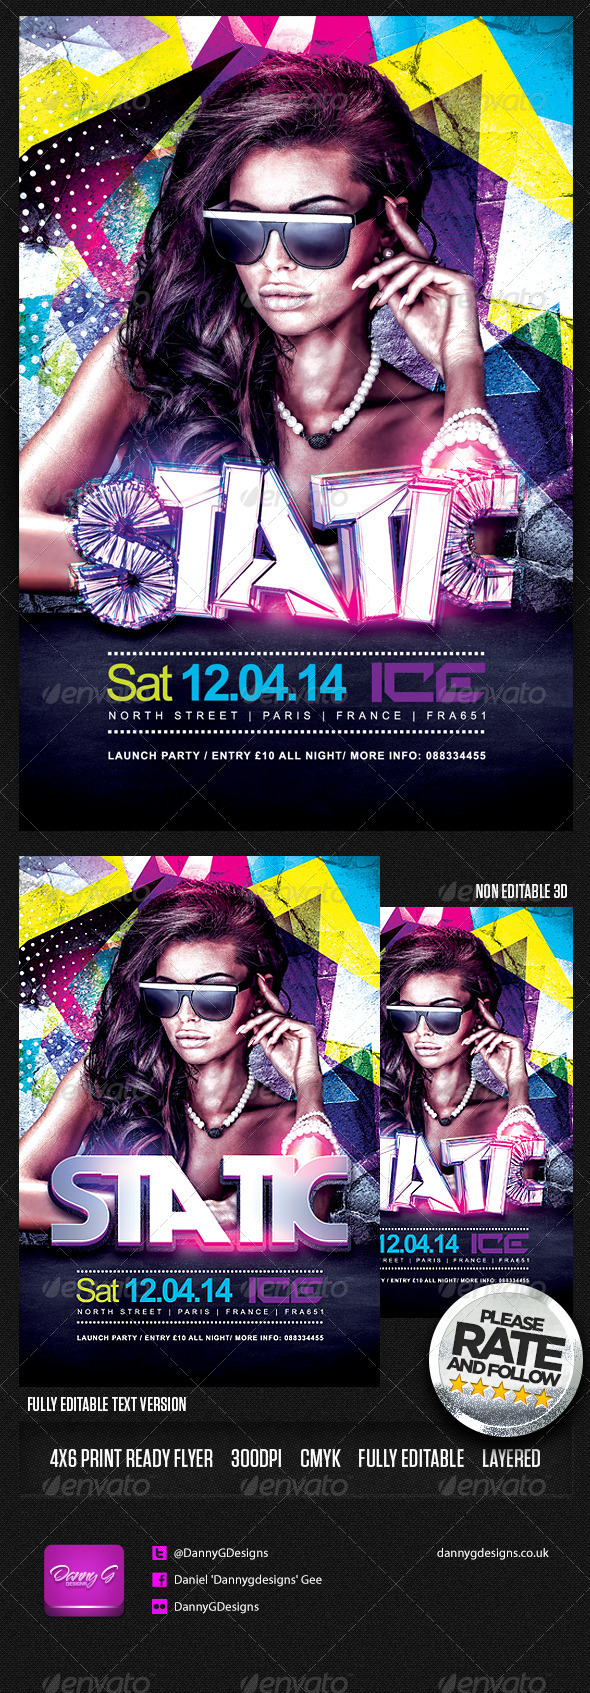 Static Flyer Template PSD